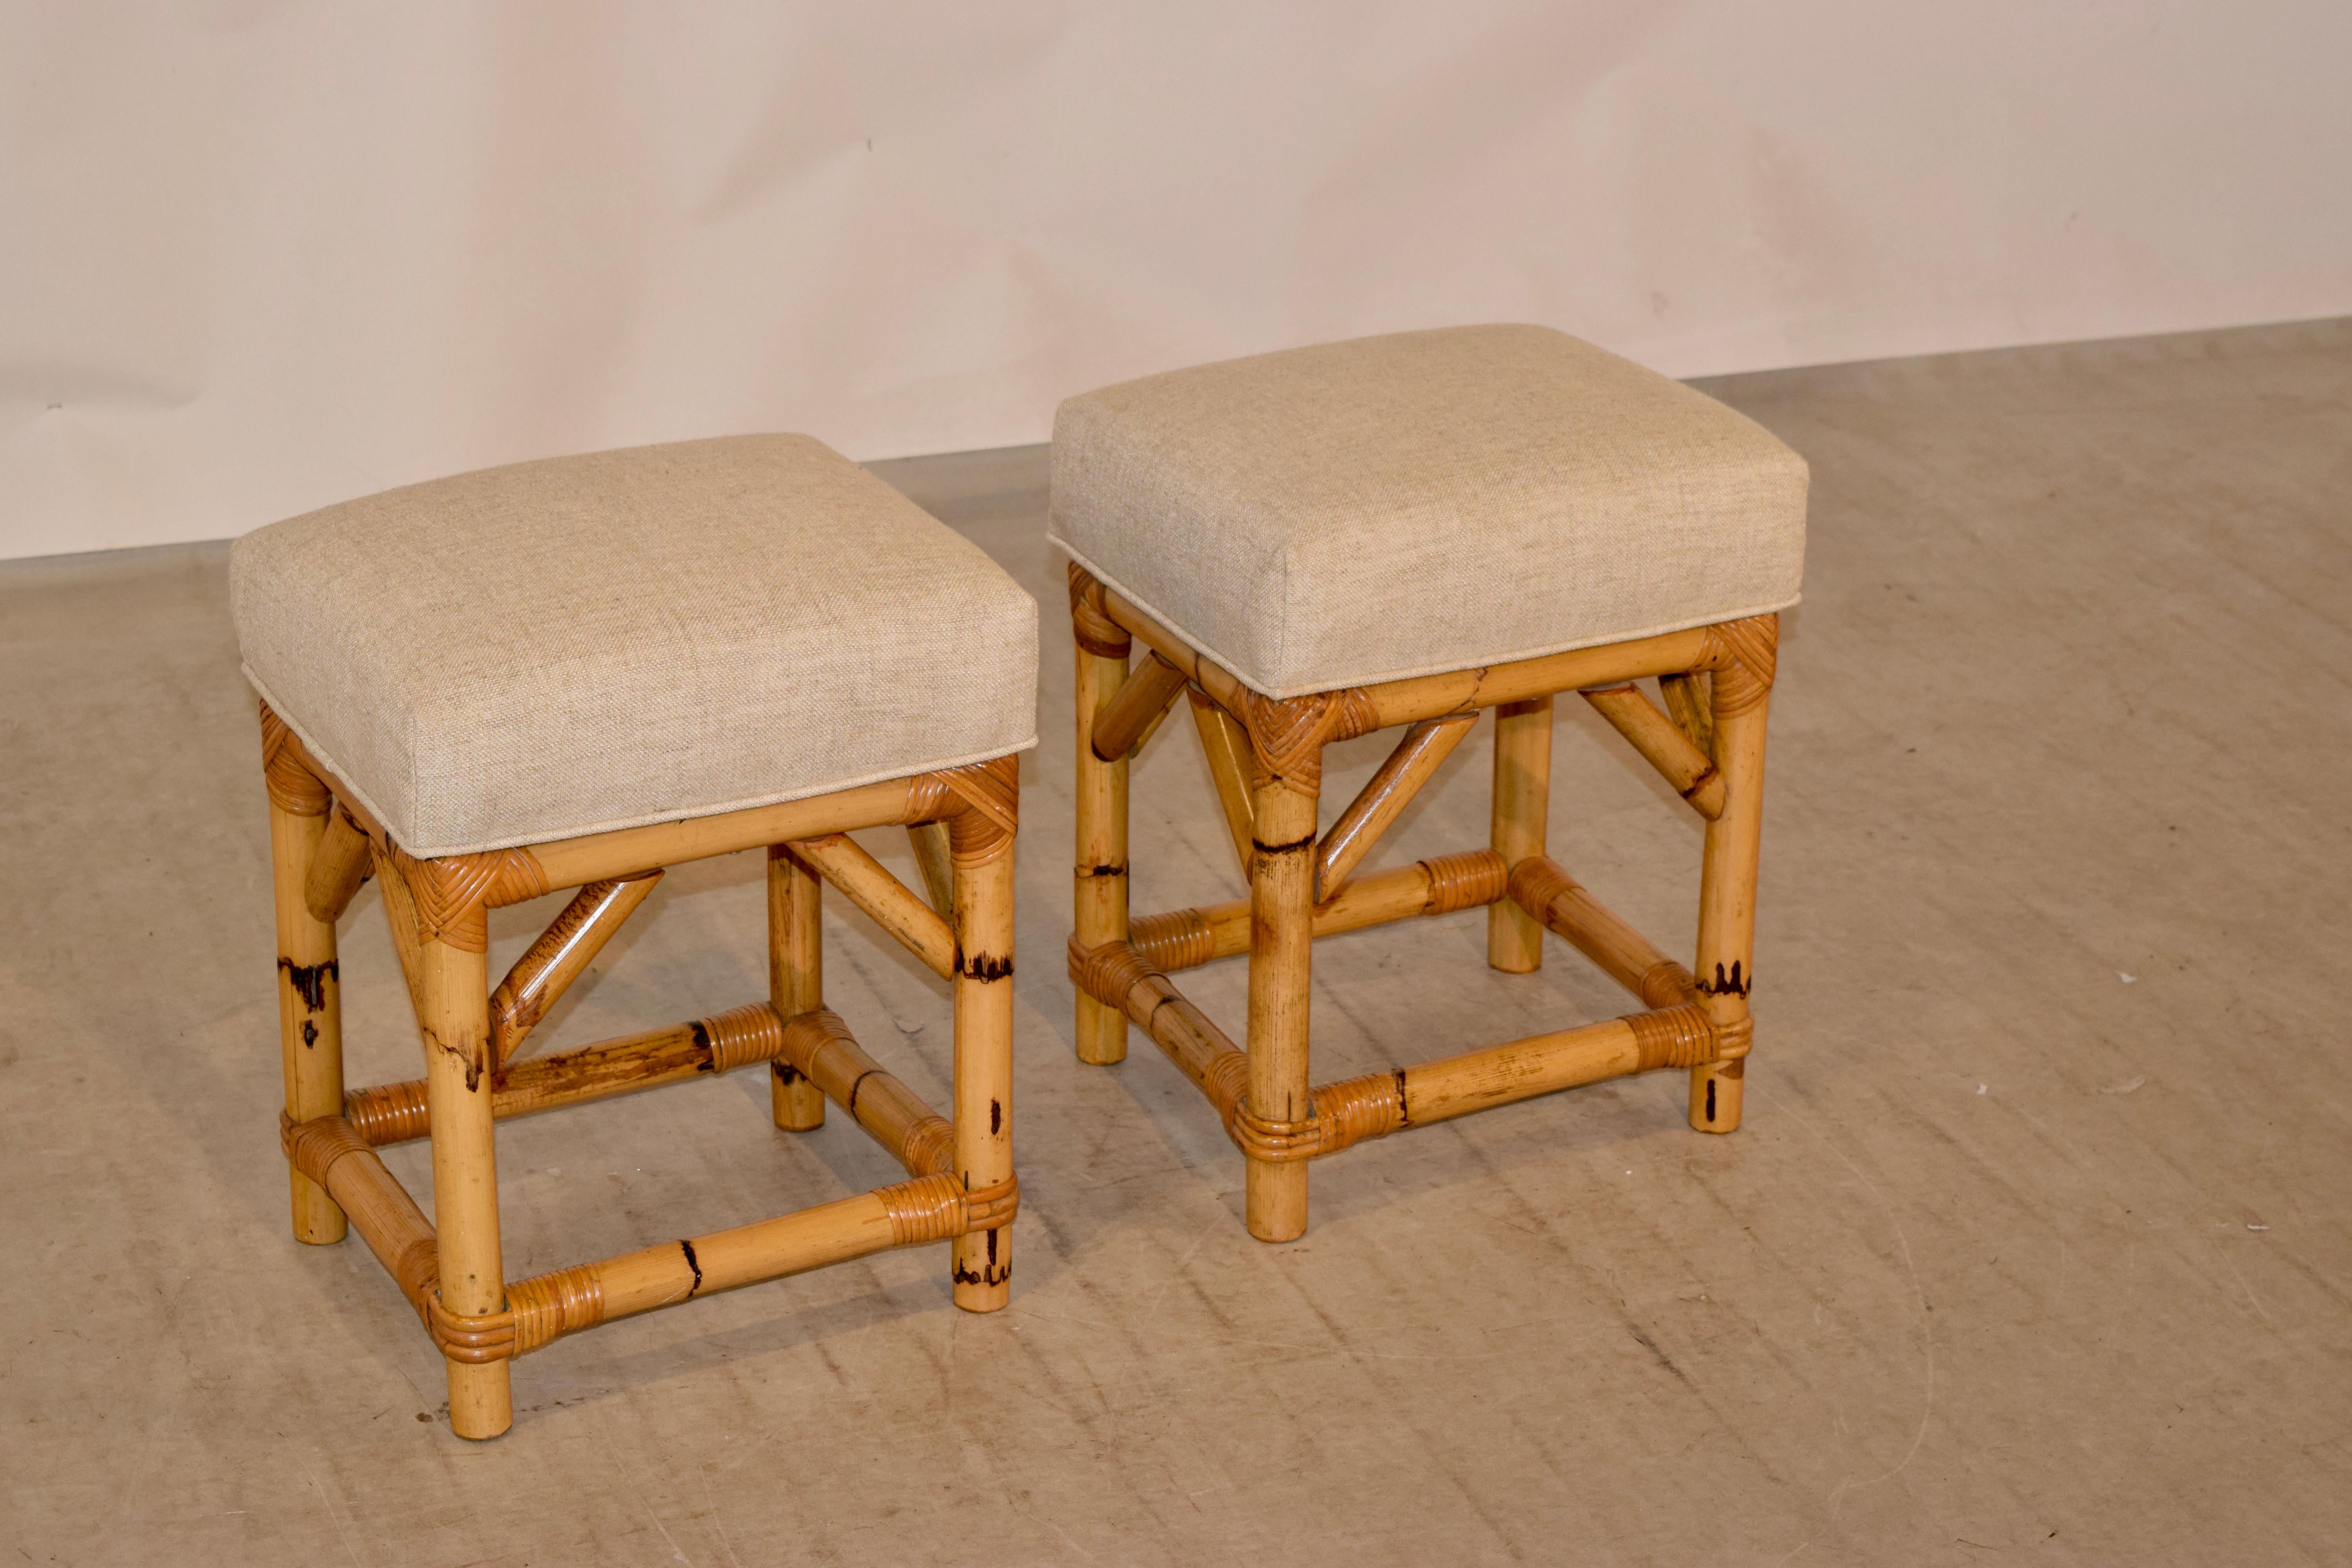 Pair of bamboo stools from England with newly covered seats in linen.